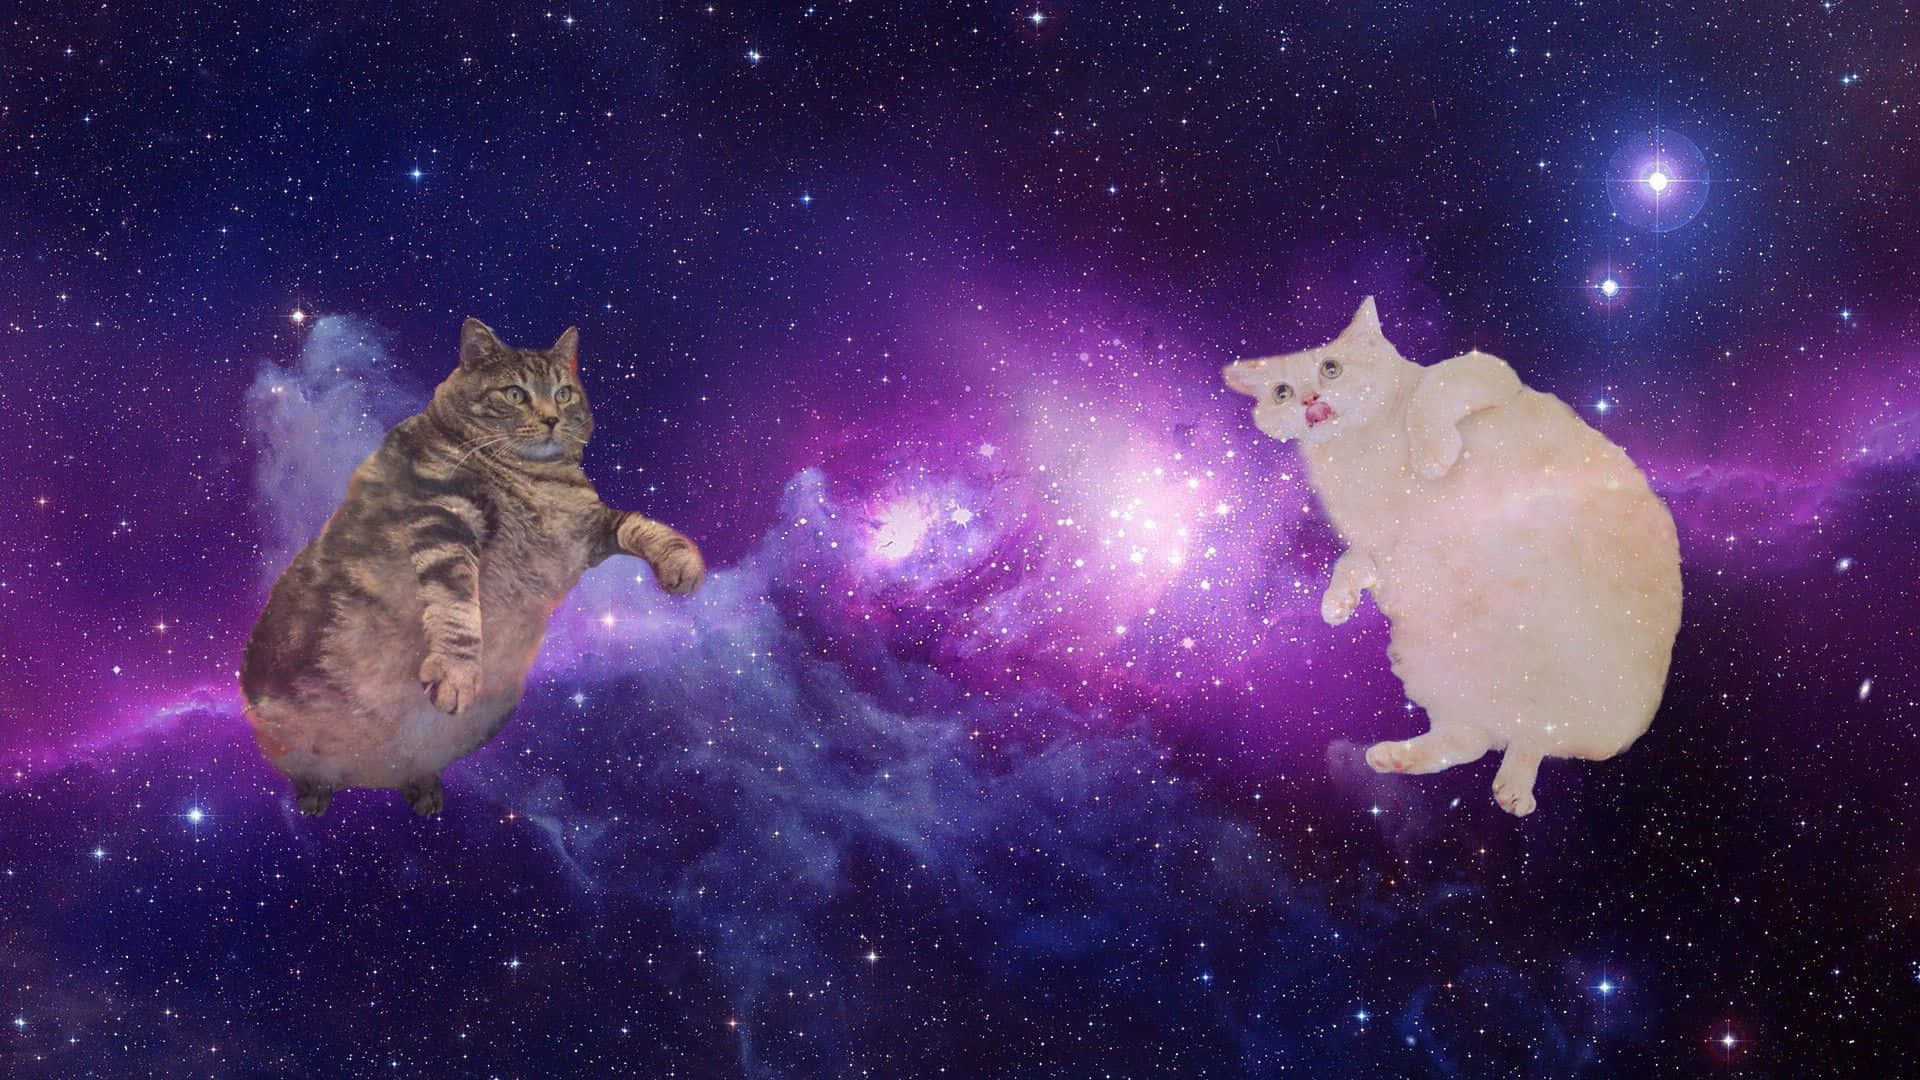 "A pair of cats soar through space amongst the stars" Wallpaper